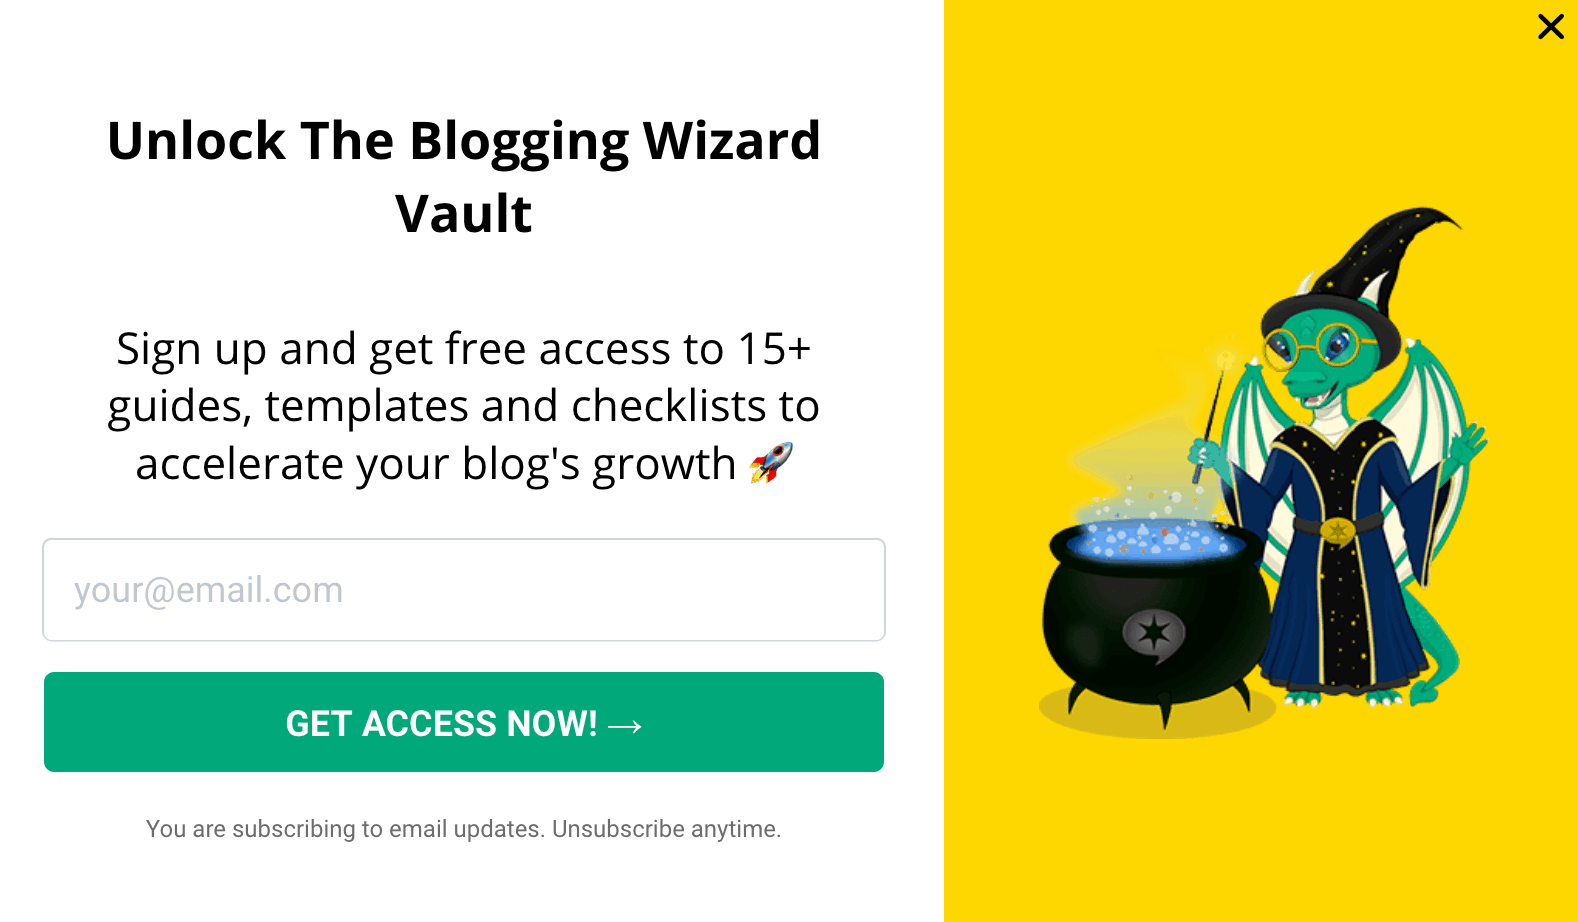 Blogging Wizard invites you to join their vault to get all their goodies that help with your blog's growth.